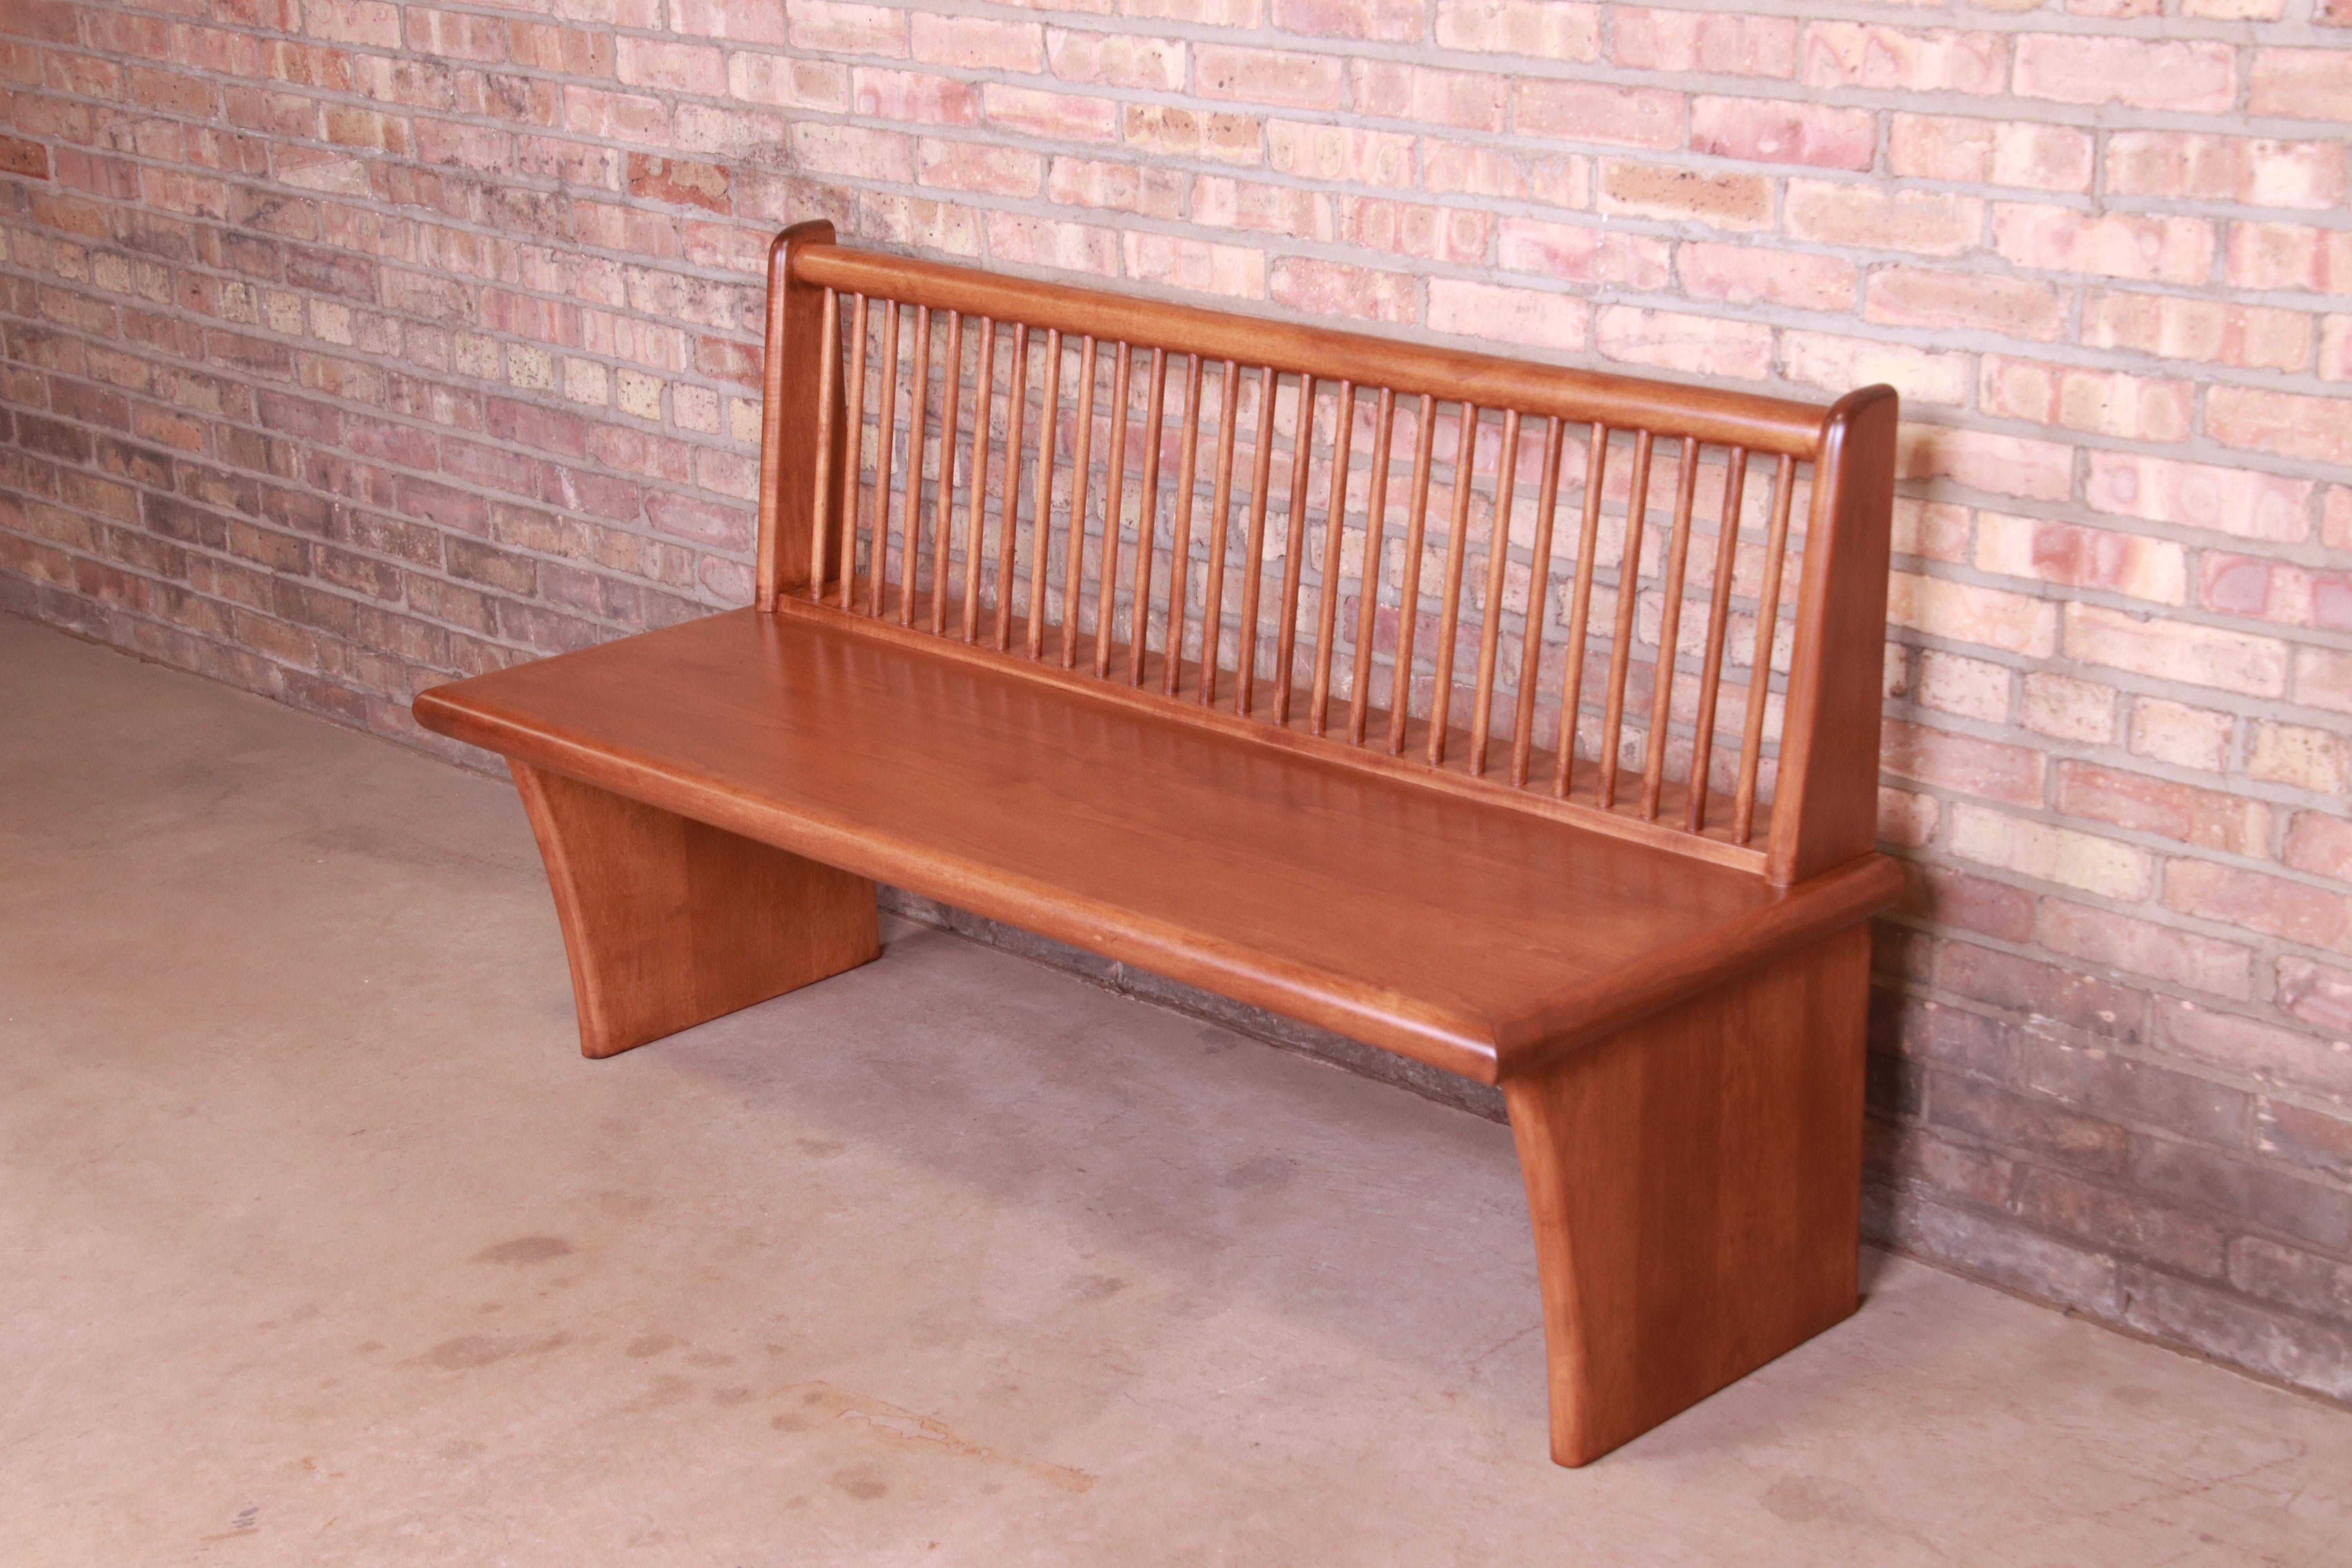 20th Century Mid-Century Modern Spindle Back Bench, Newly Refinished